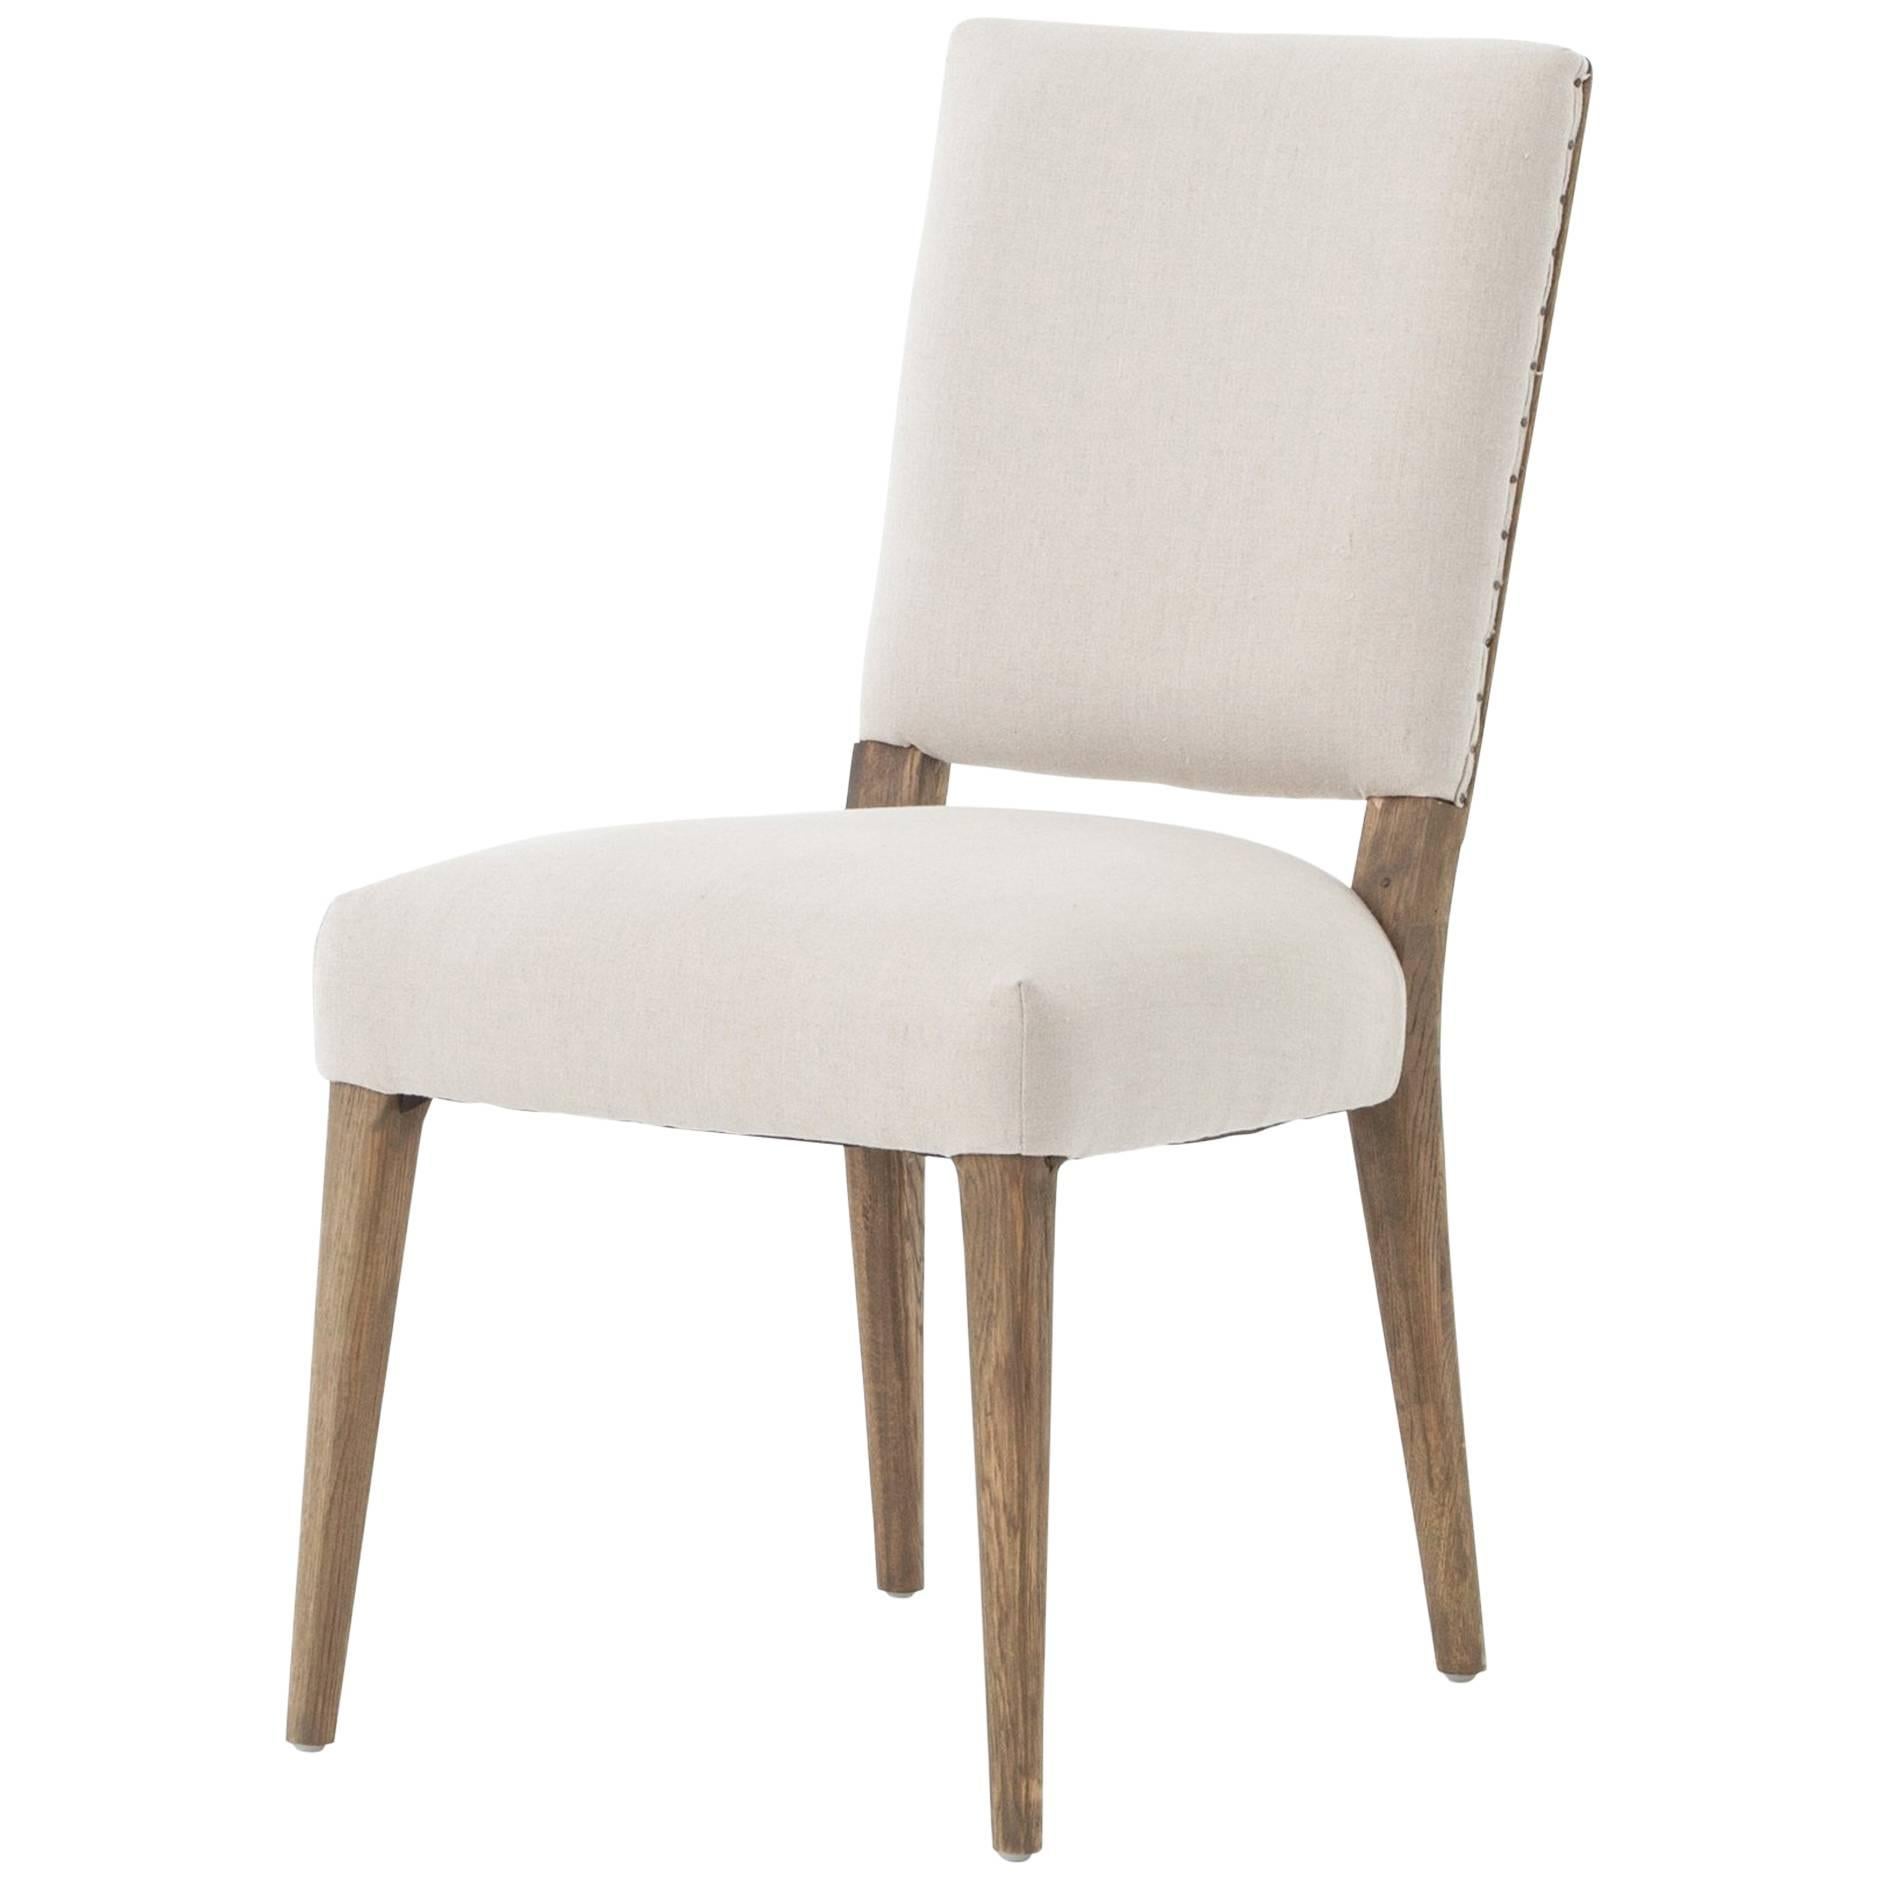 Upholstered Dining Chair For Sale